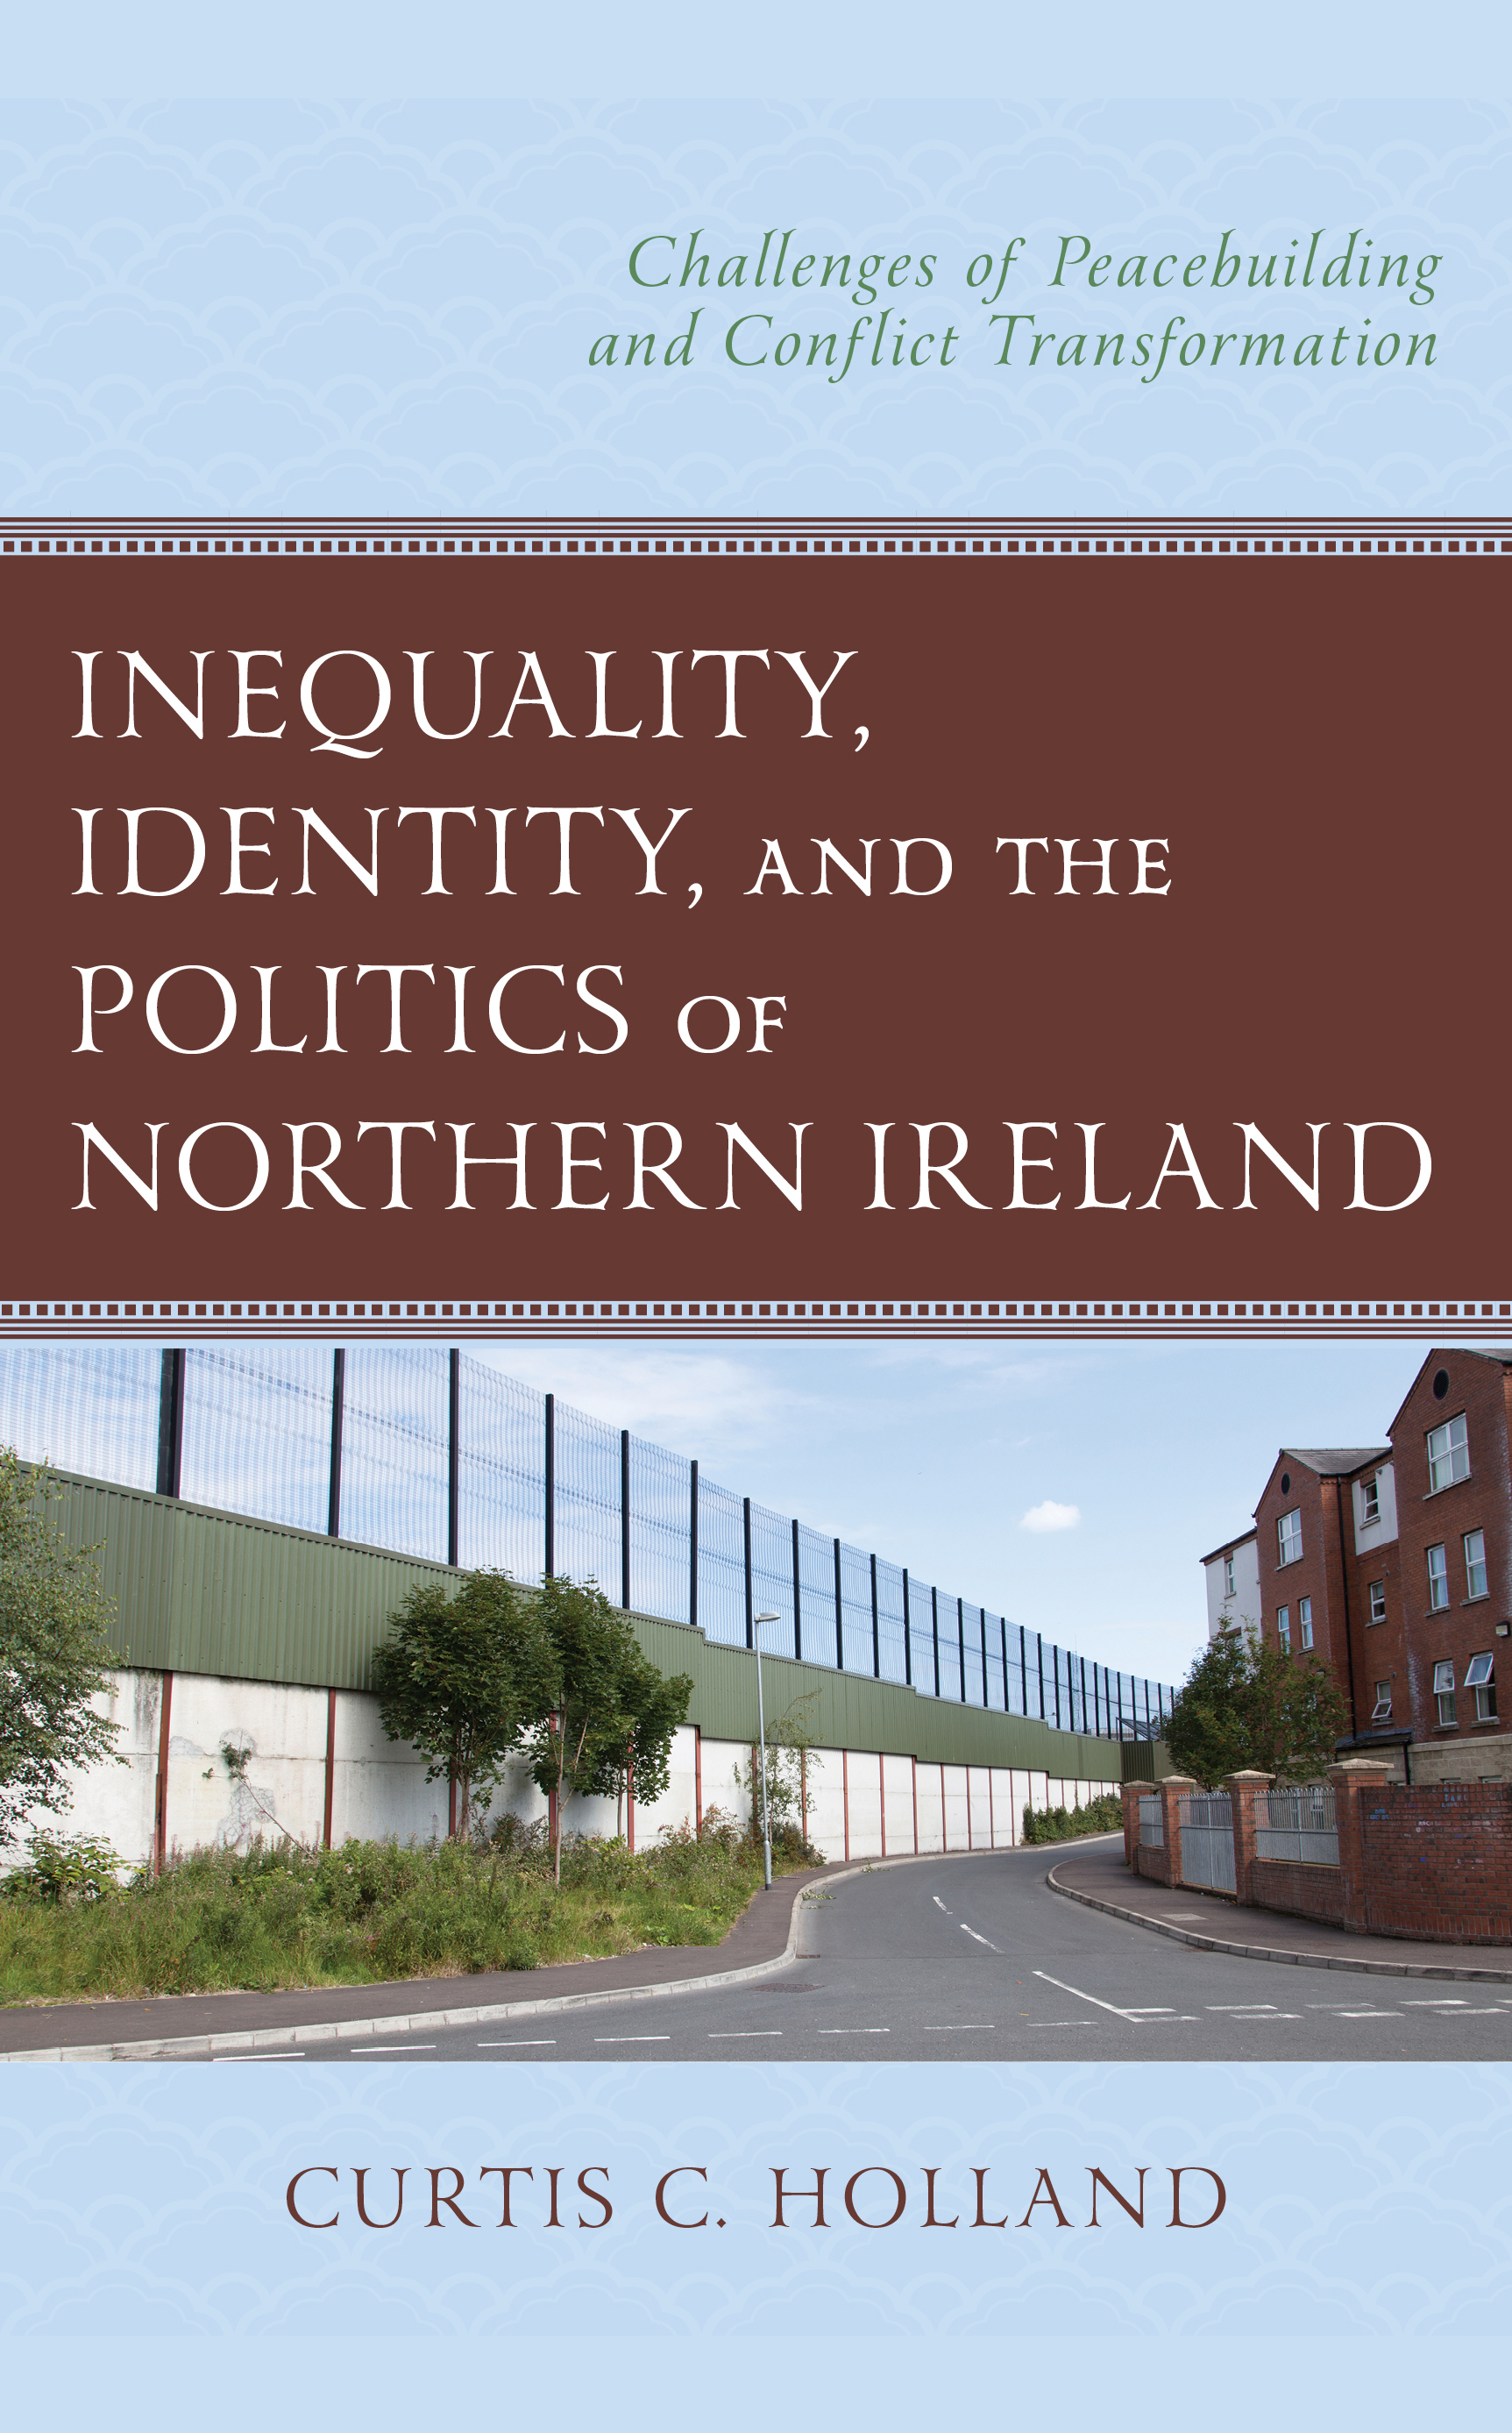 Inequality, Identity, and the Politics of Northern Ireland: Challenges of Peacebuilding and Conflict Transformation